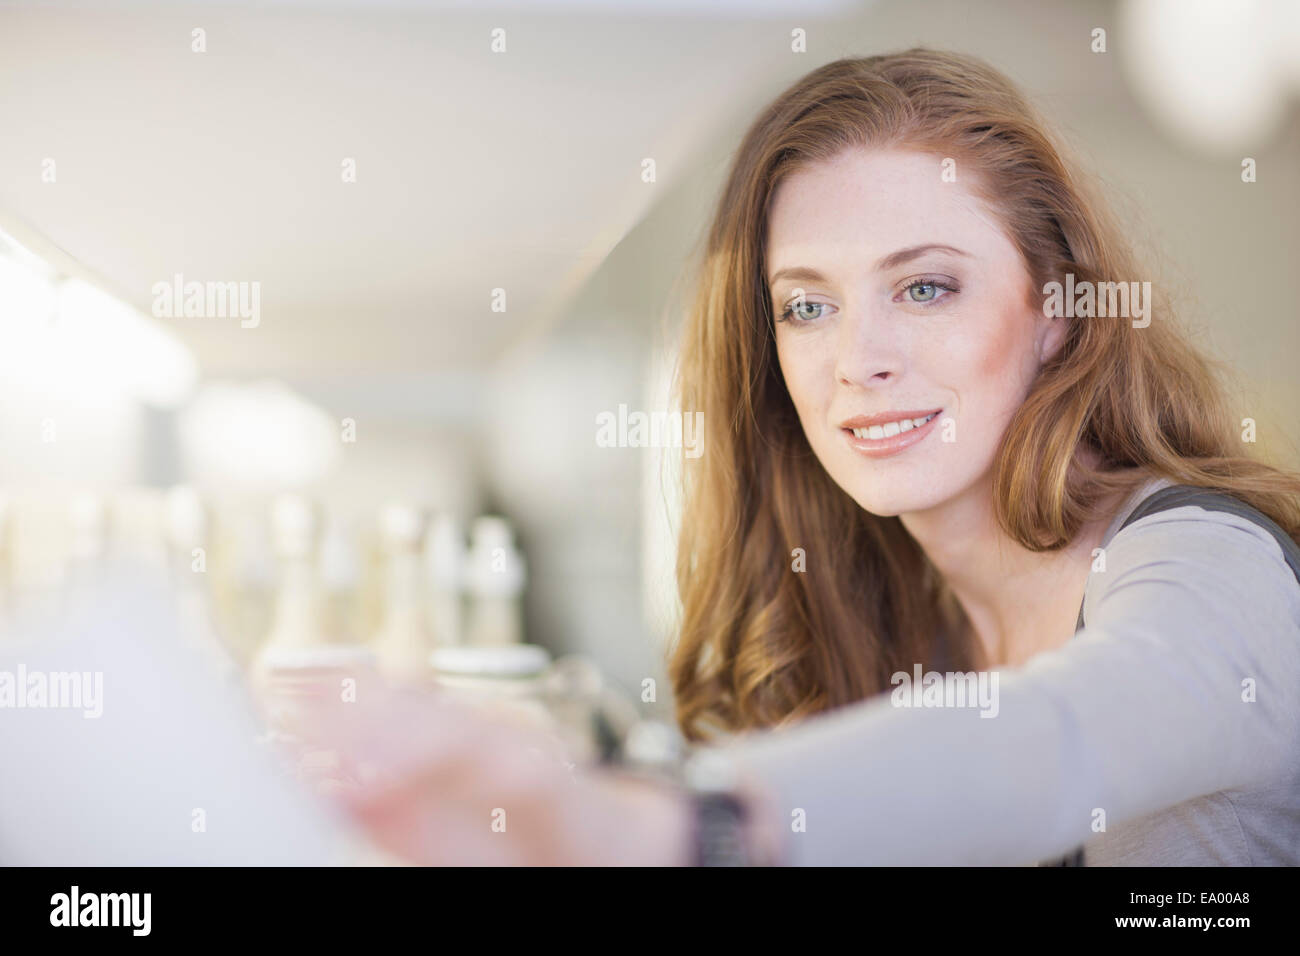 Woman browsing products on display shelf Stock Photo